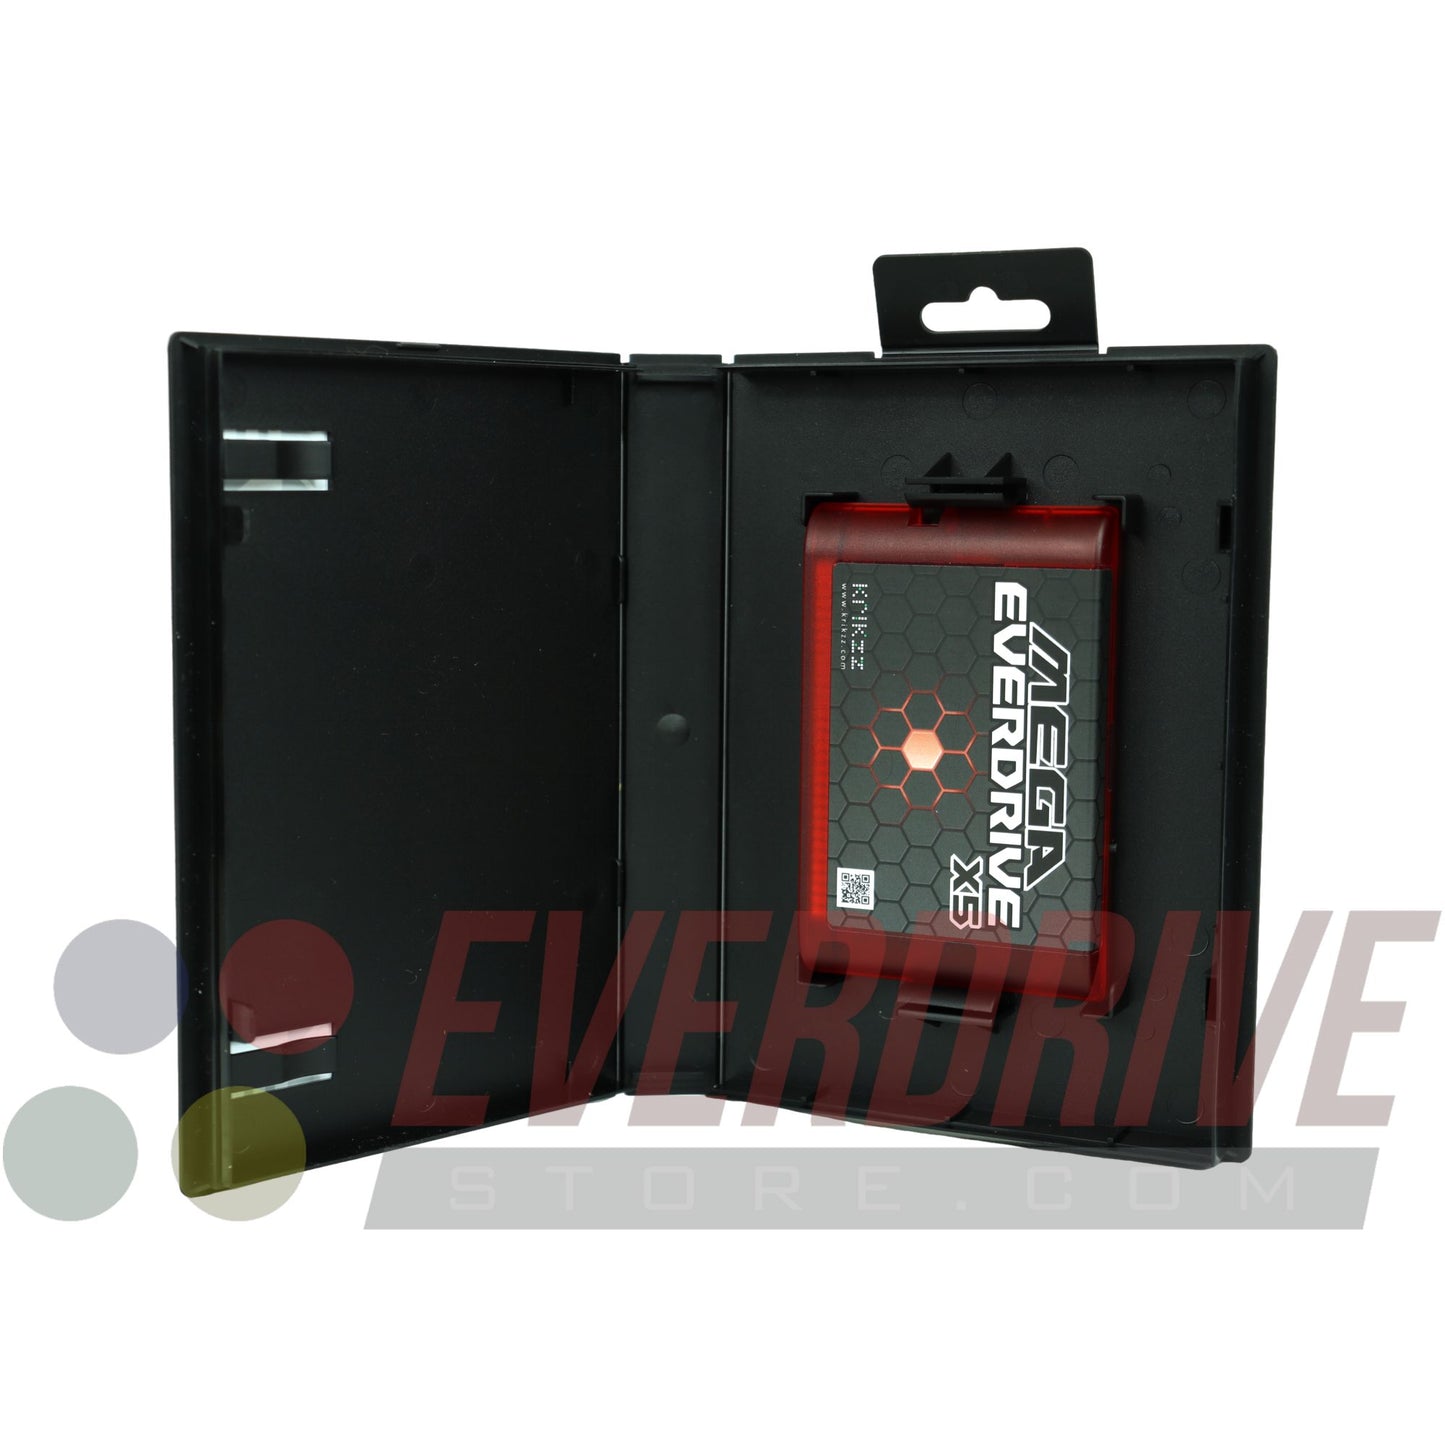 Mega Everdrive X5 - Frosted Red